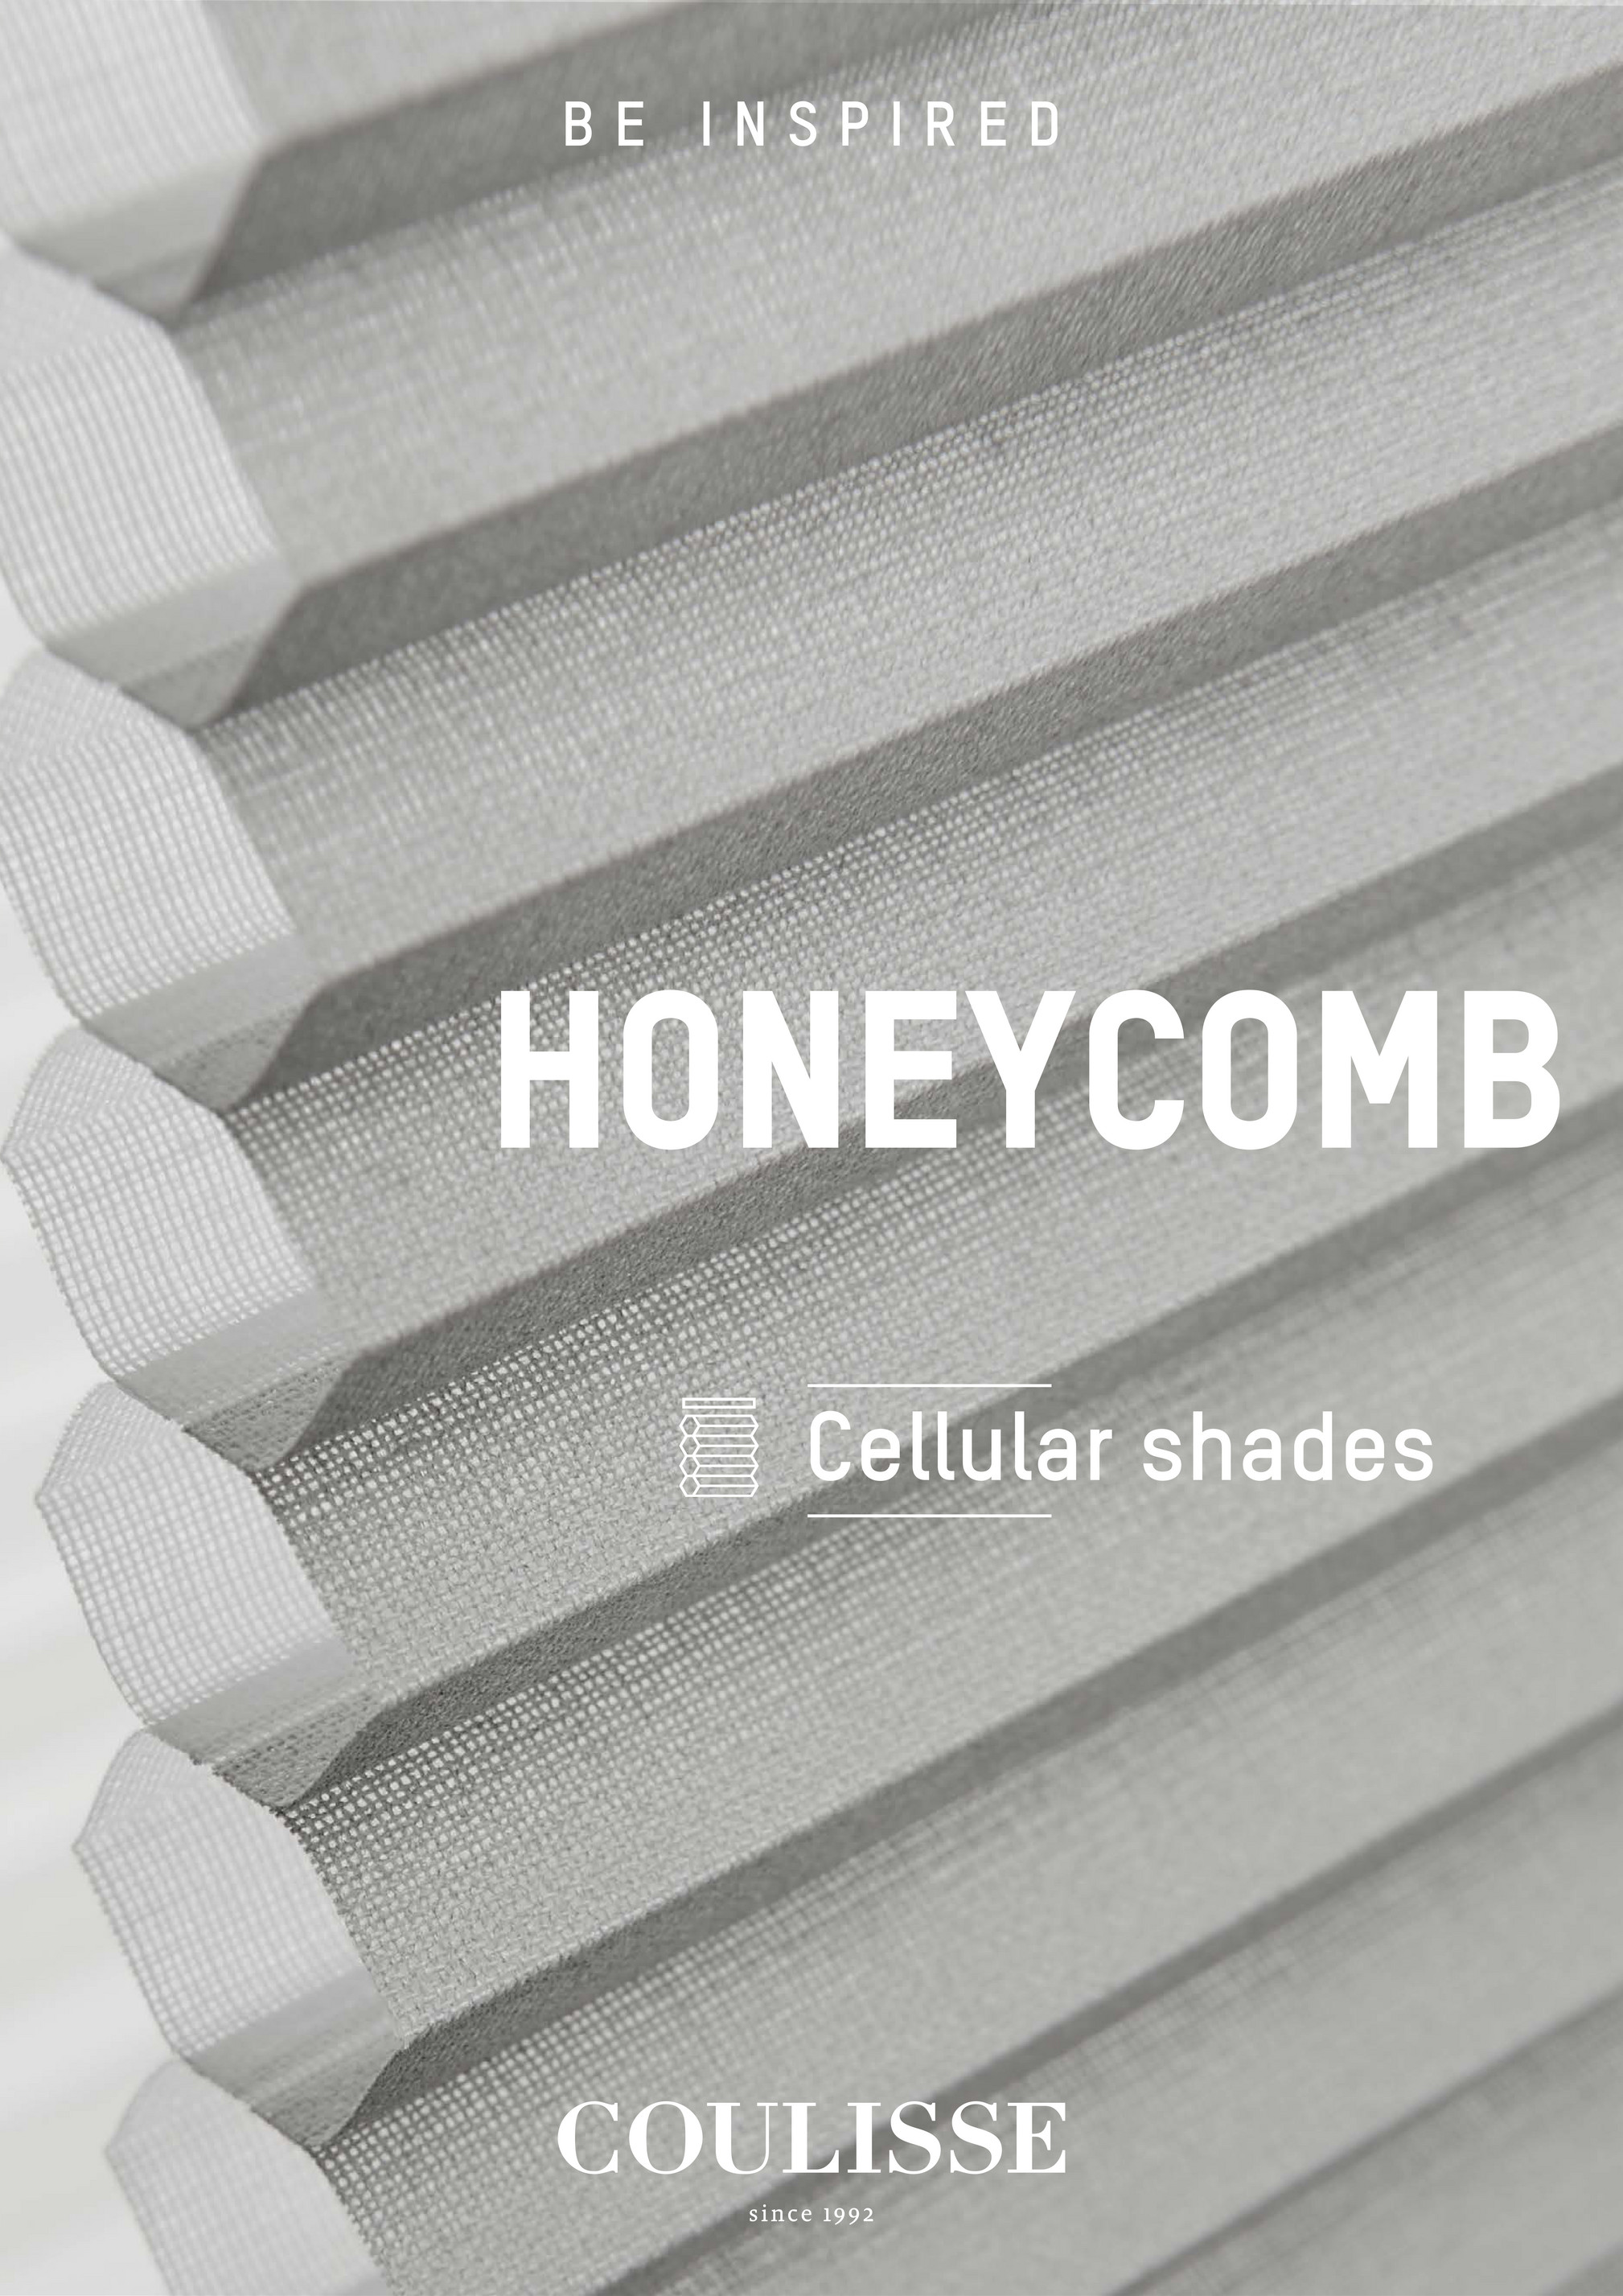 Coulisse - Honeycomb USA - Collection Page 1